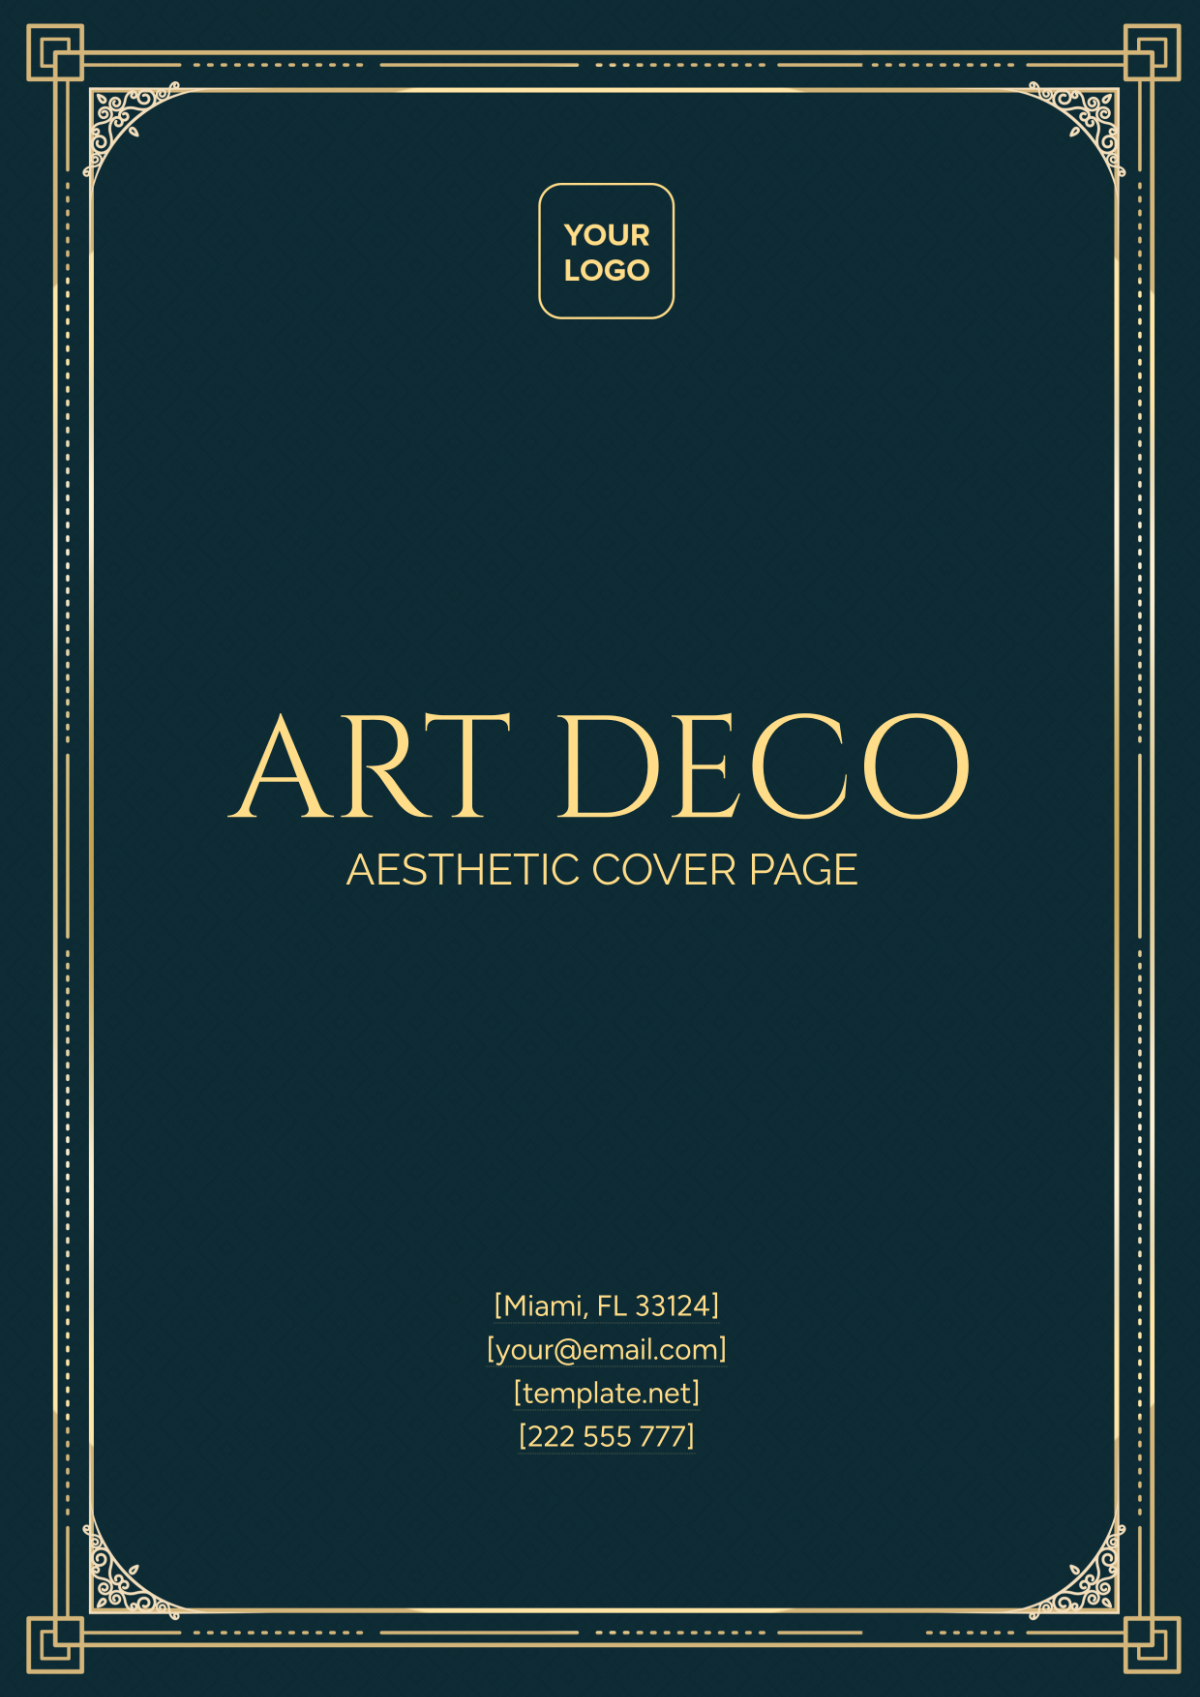 Art Deco Aesthetic Cover Page Template